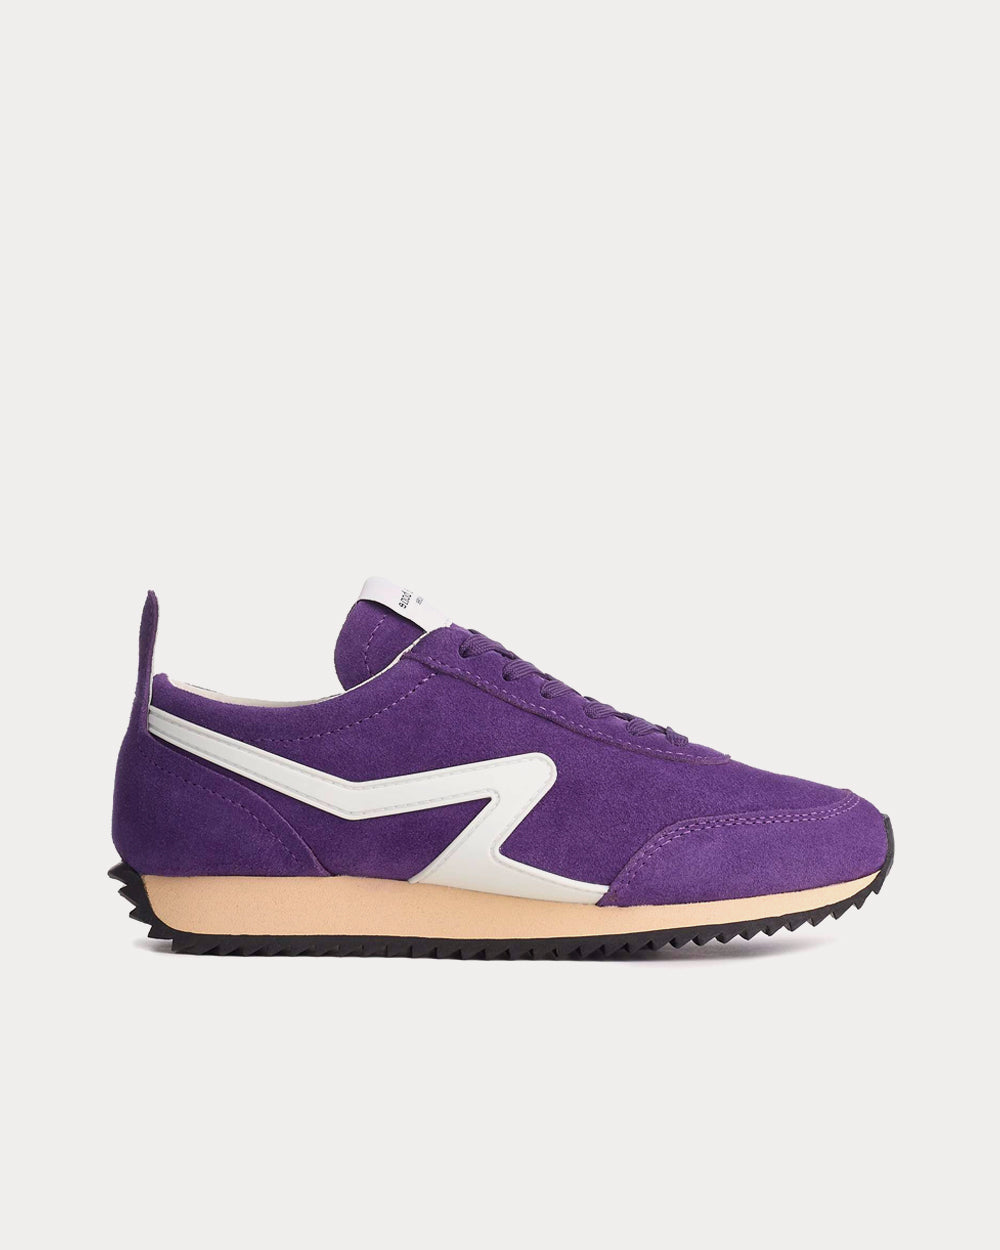 Rag & Bone Retro Runner Suede And Recycled Materials Blue Violet Low ...